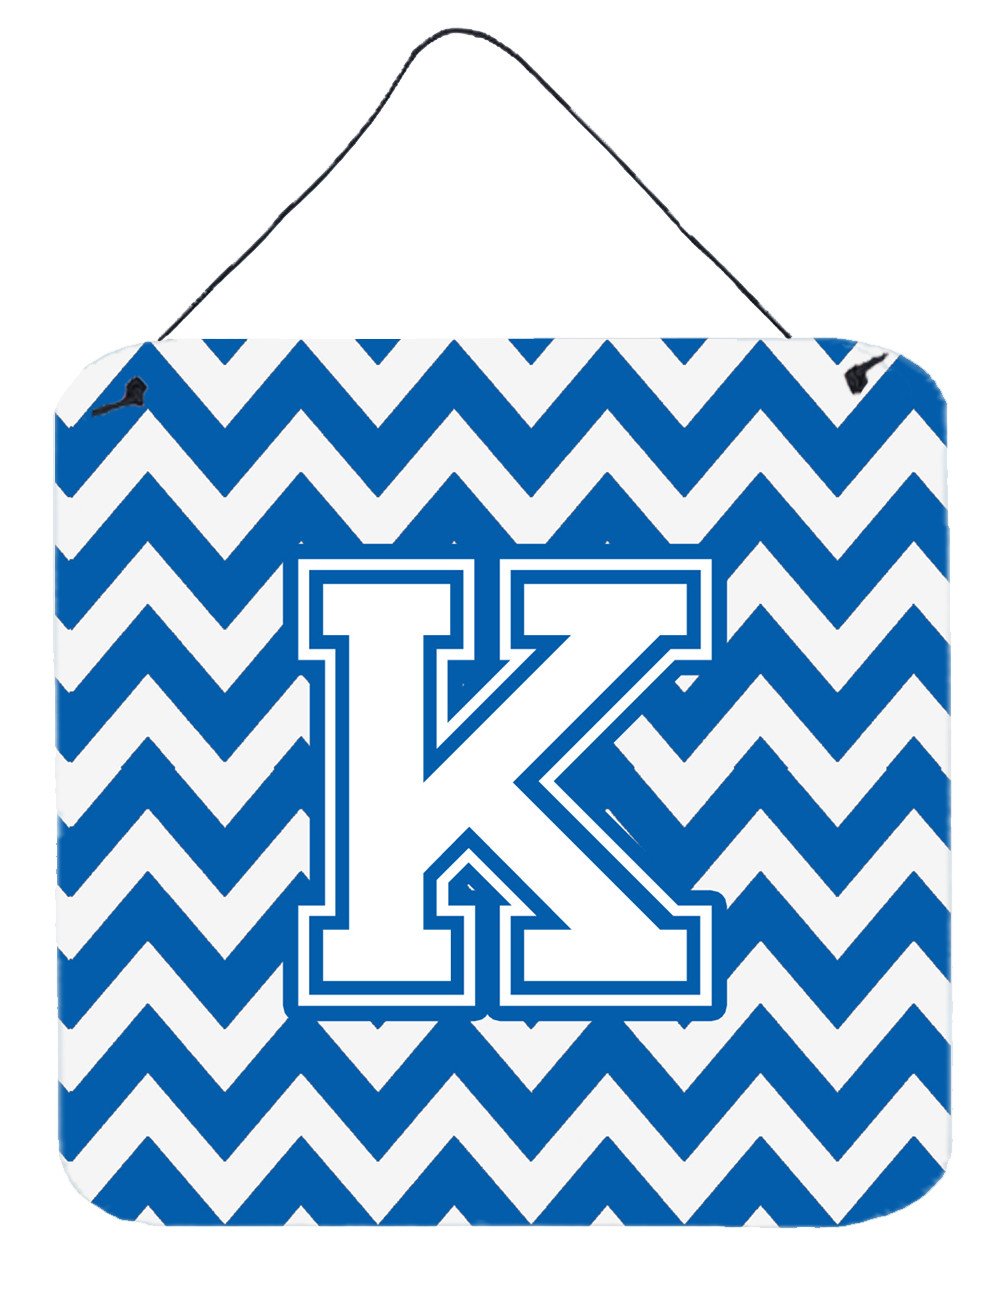 Letter K Chevron Blue and White Wall or Door Hanging Prints CJ1045-KDS66 by Caroline's Treasures